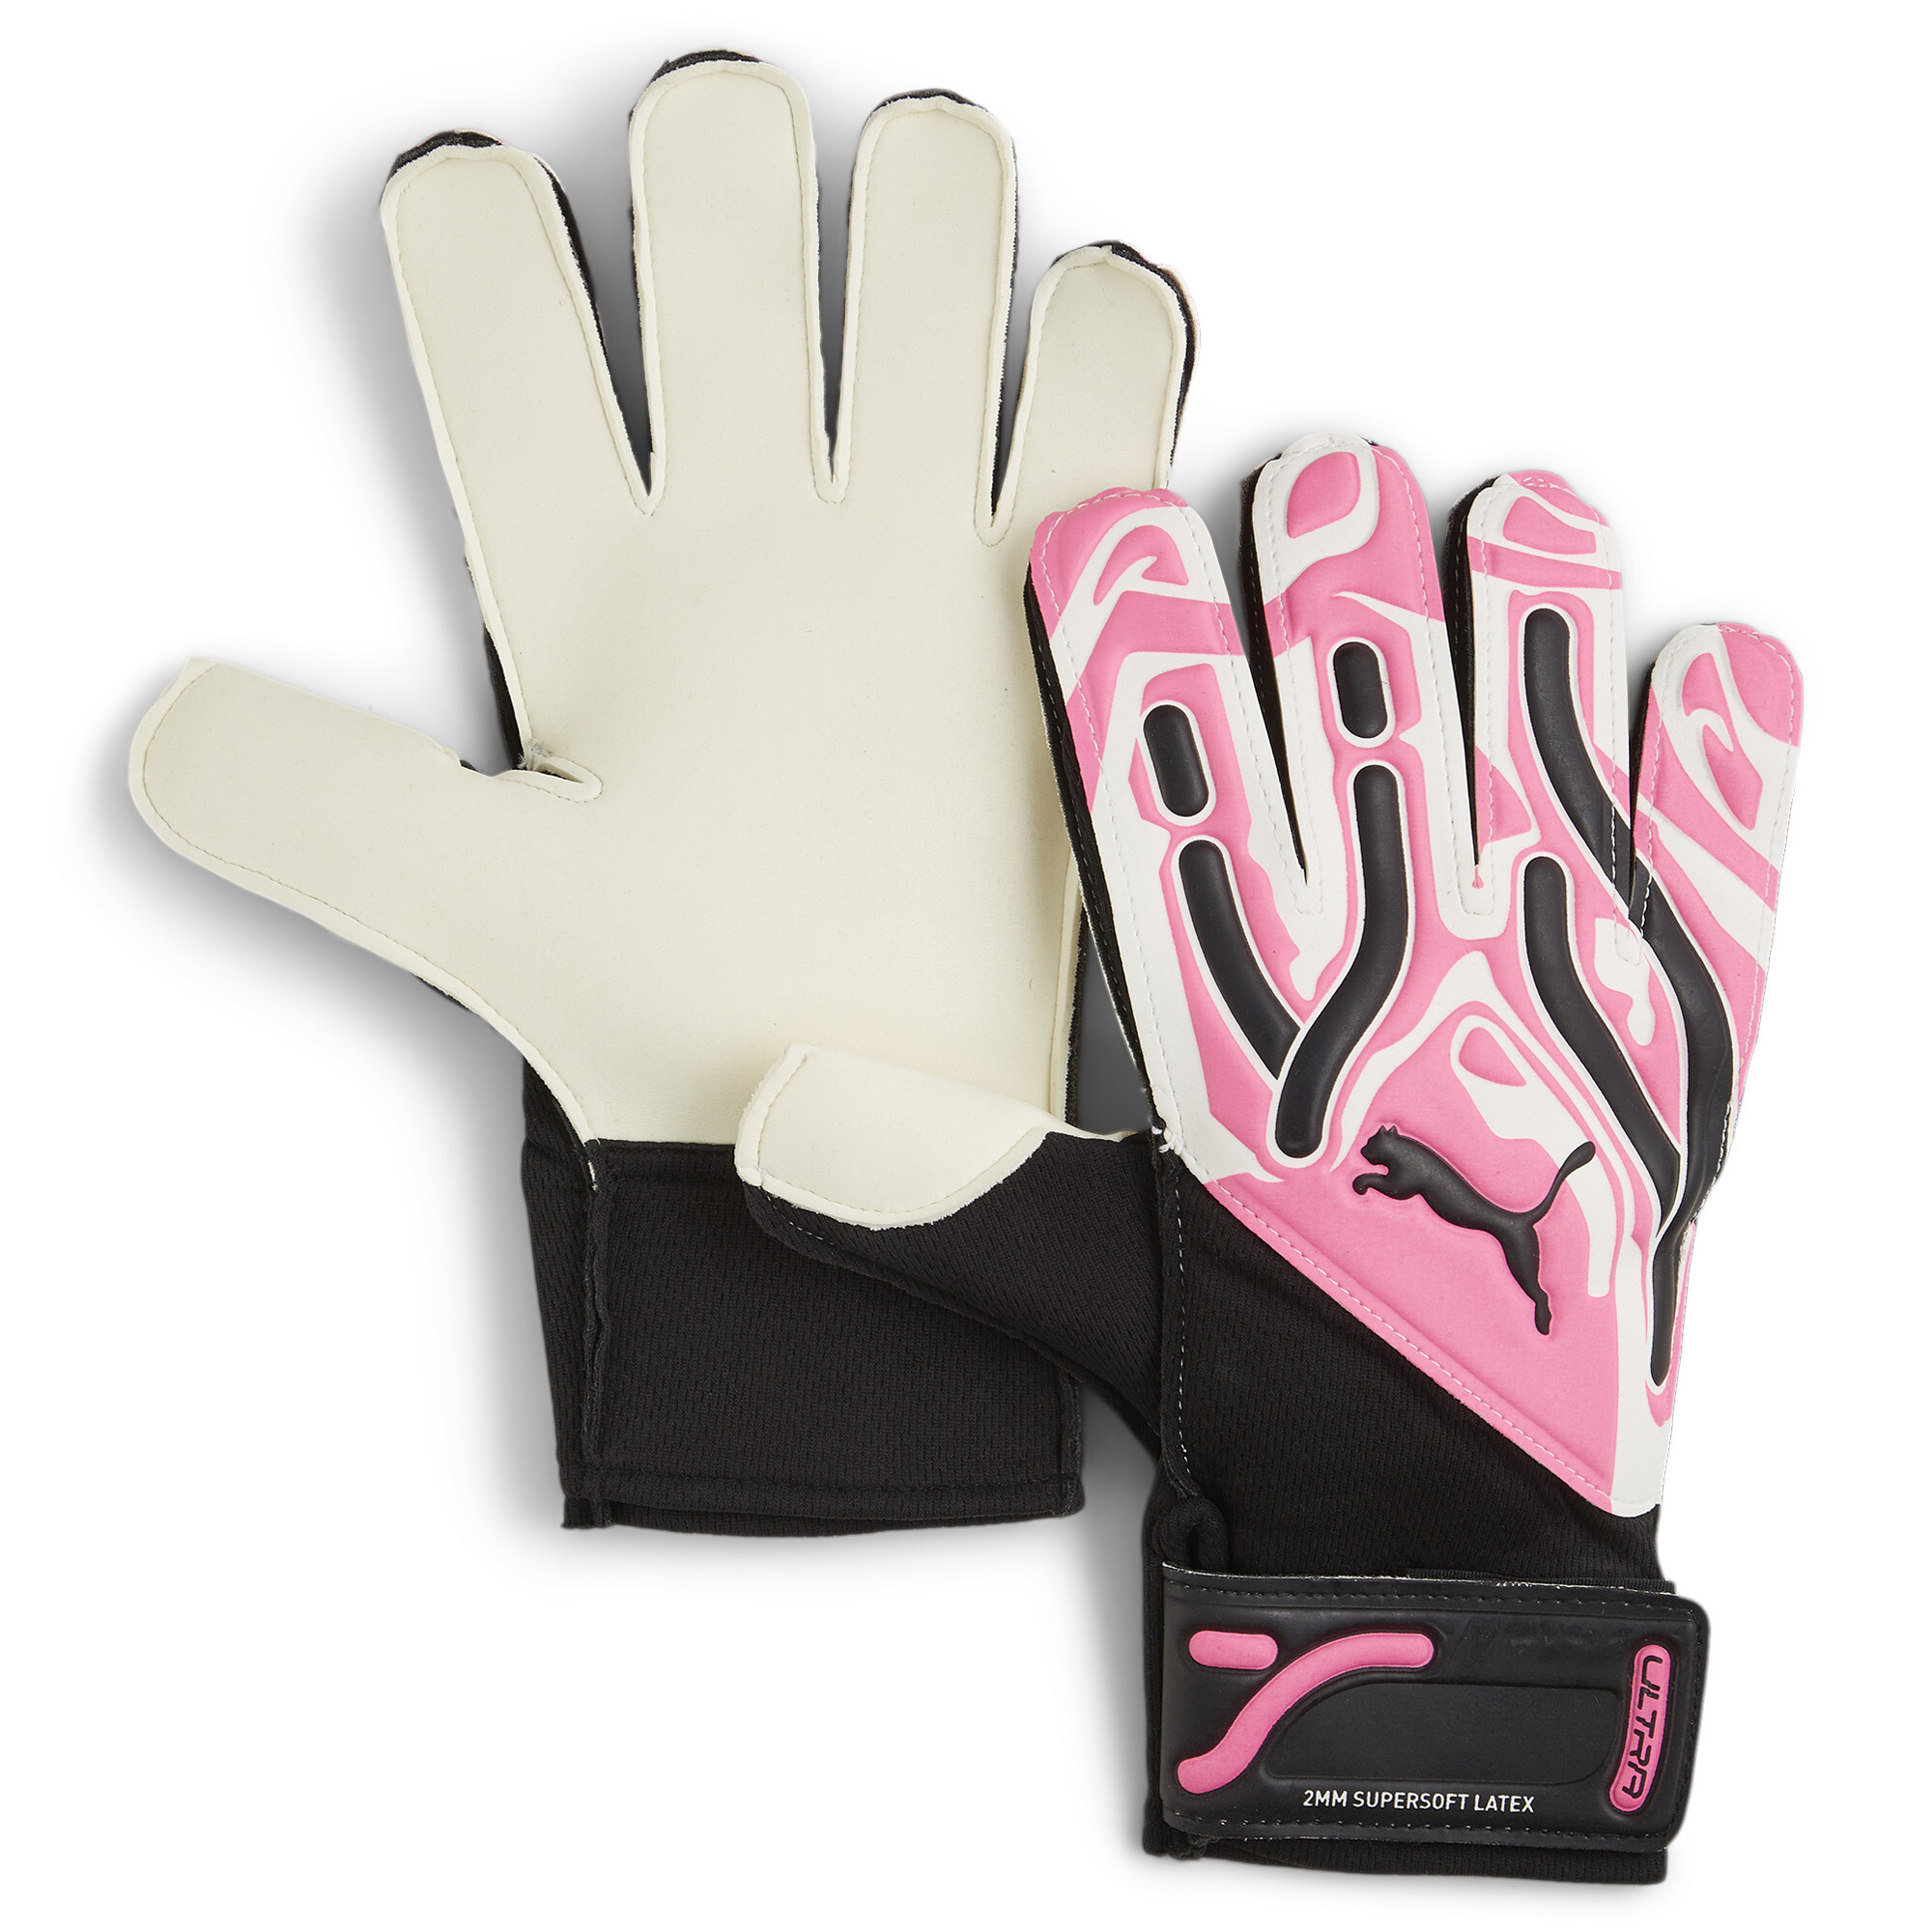 Men's PUMA ULTRA Play RC Goalkeeper Gloves In Pink, Size UK 5